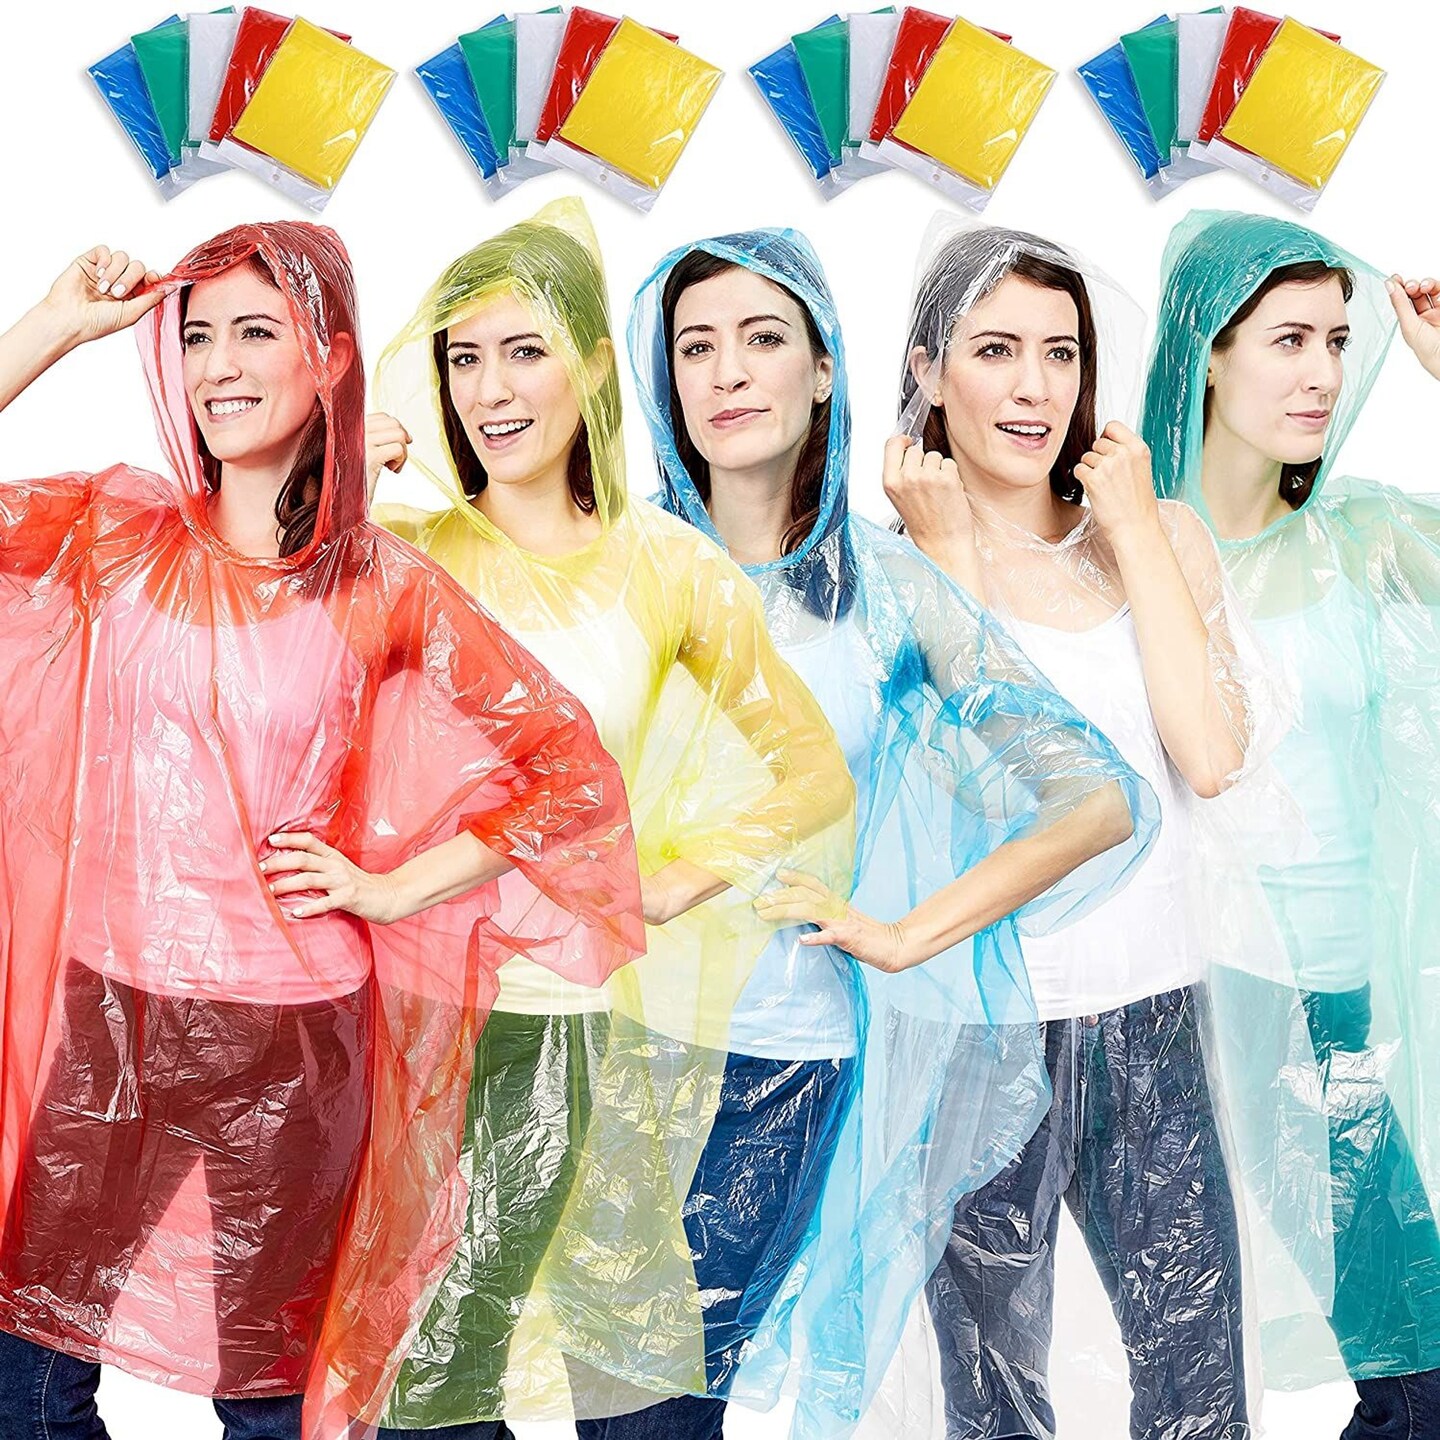 Juvale 20-Pack Disposable Rain Ponchos with Hood for Adults and Family - Clear Multicolor Emergency Raincoats